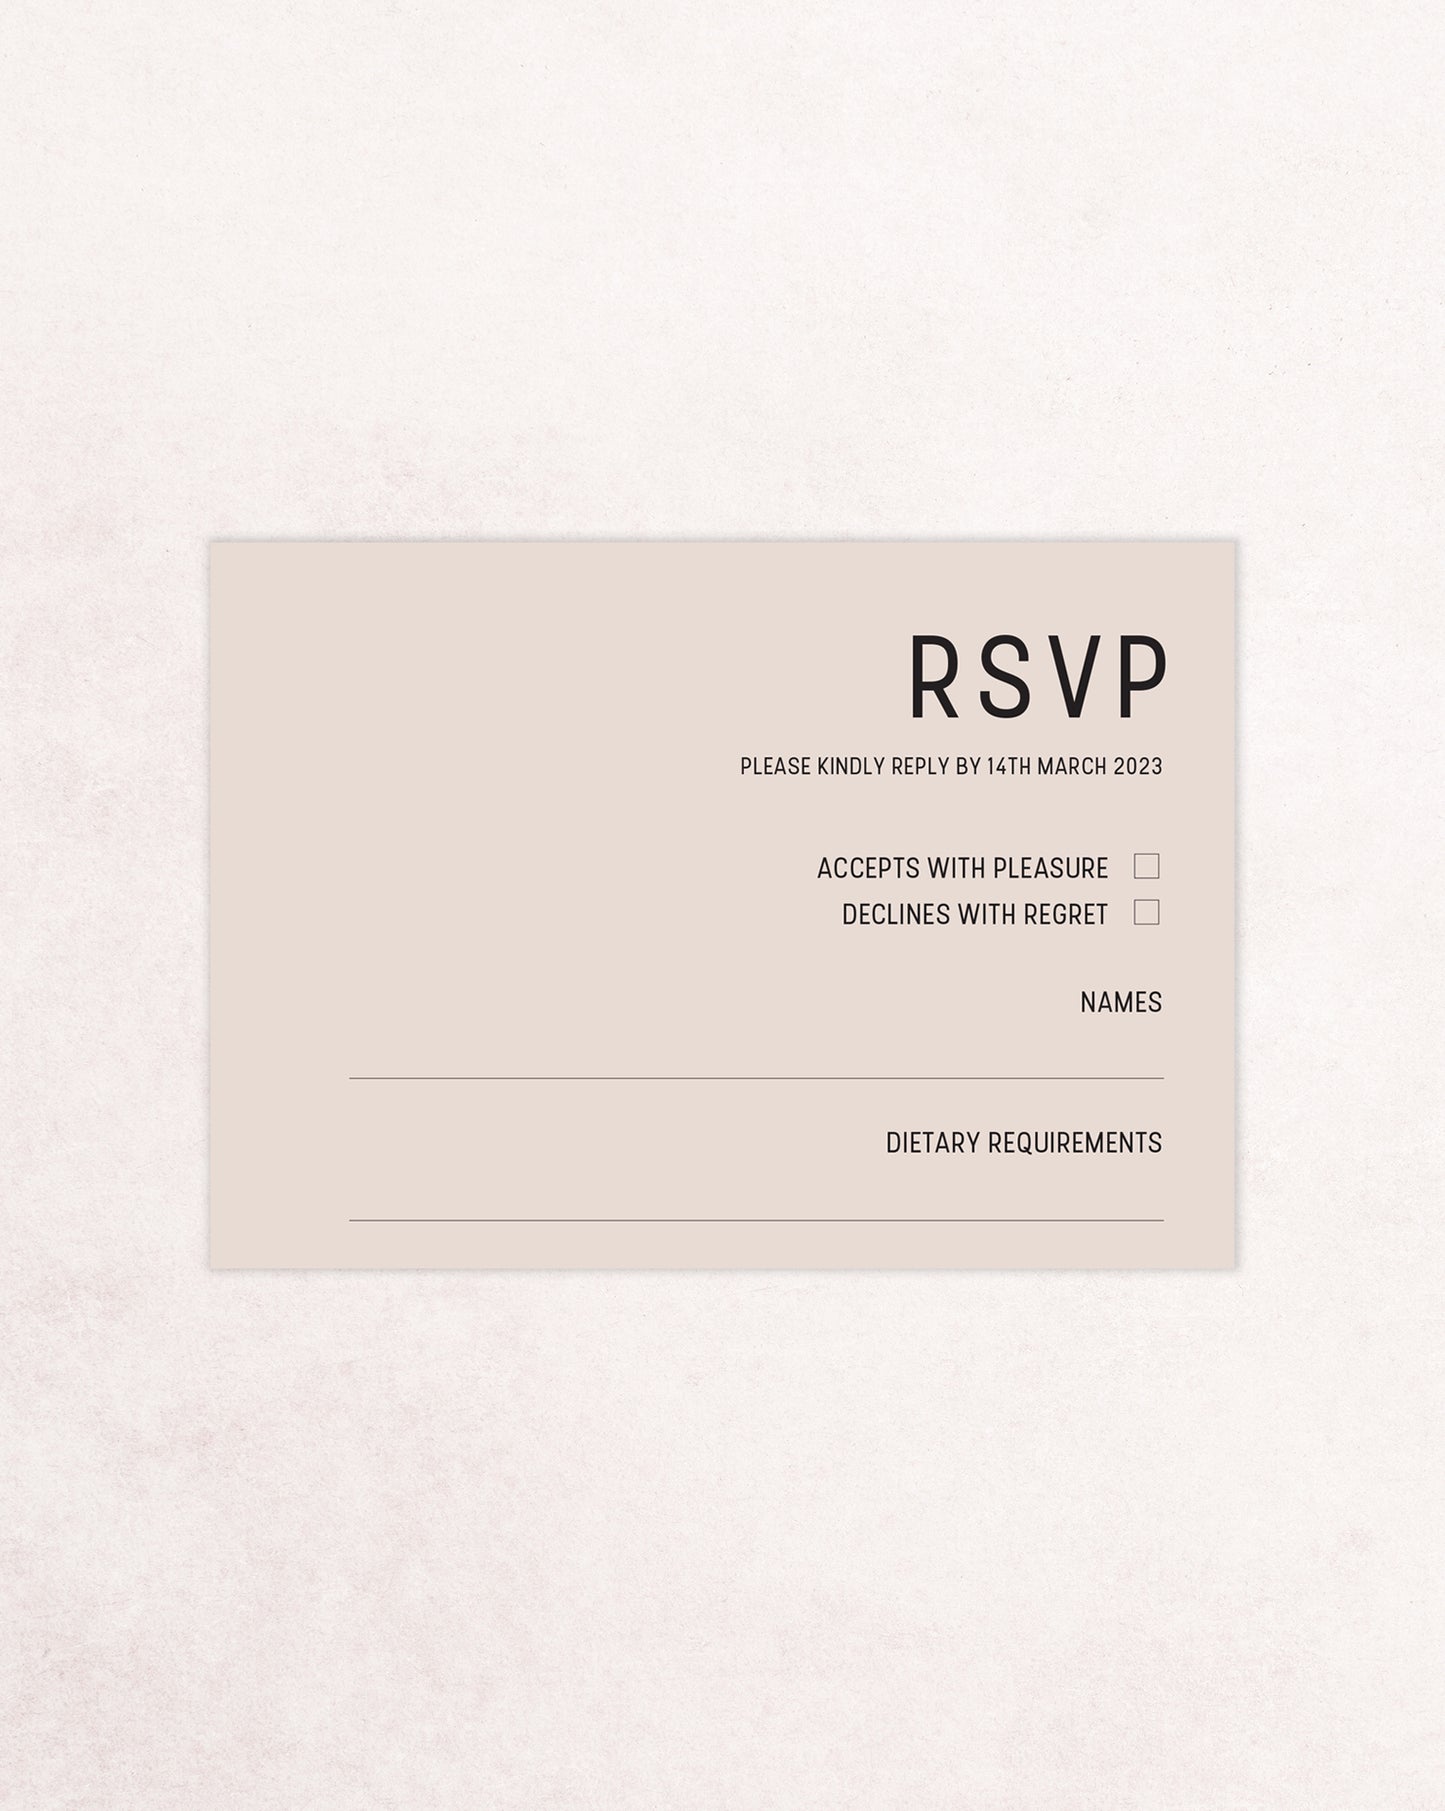 Tuscany Two Card Wedding Invitation Suite